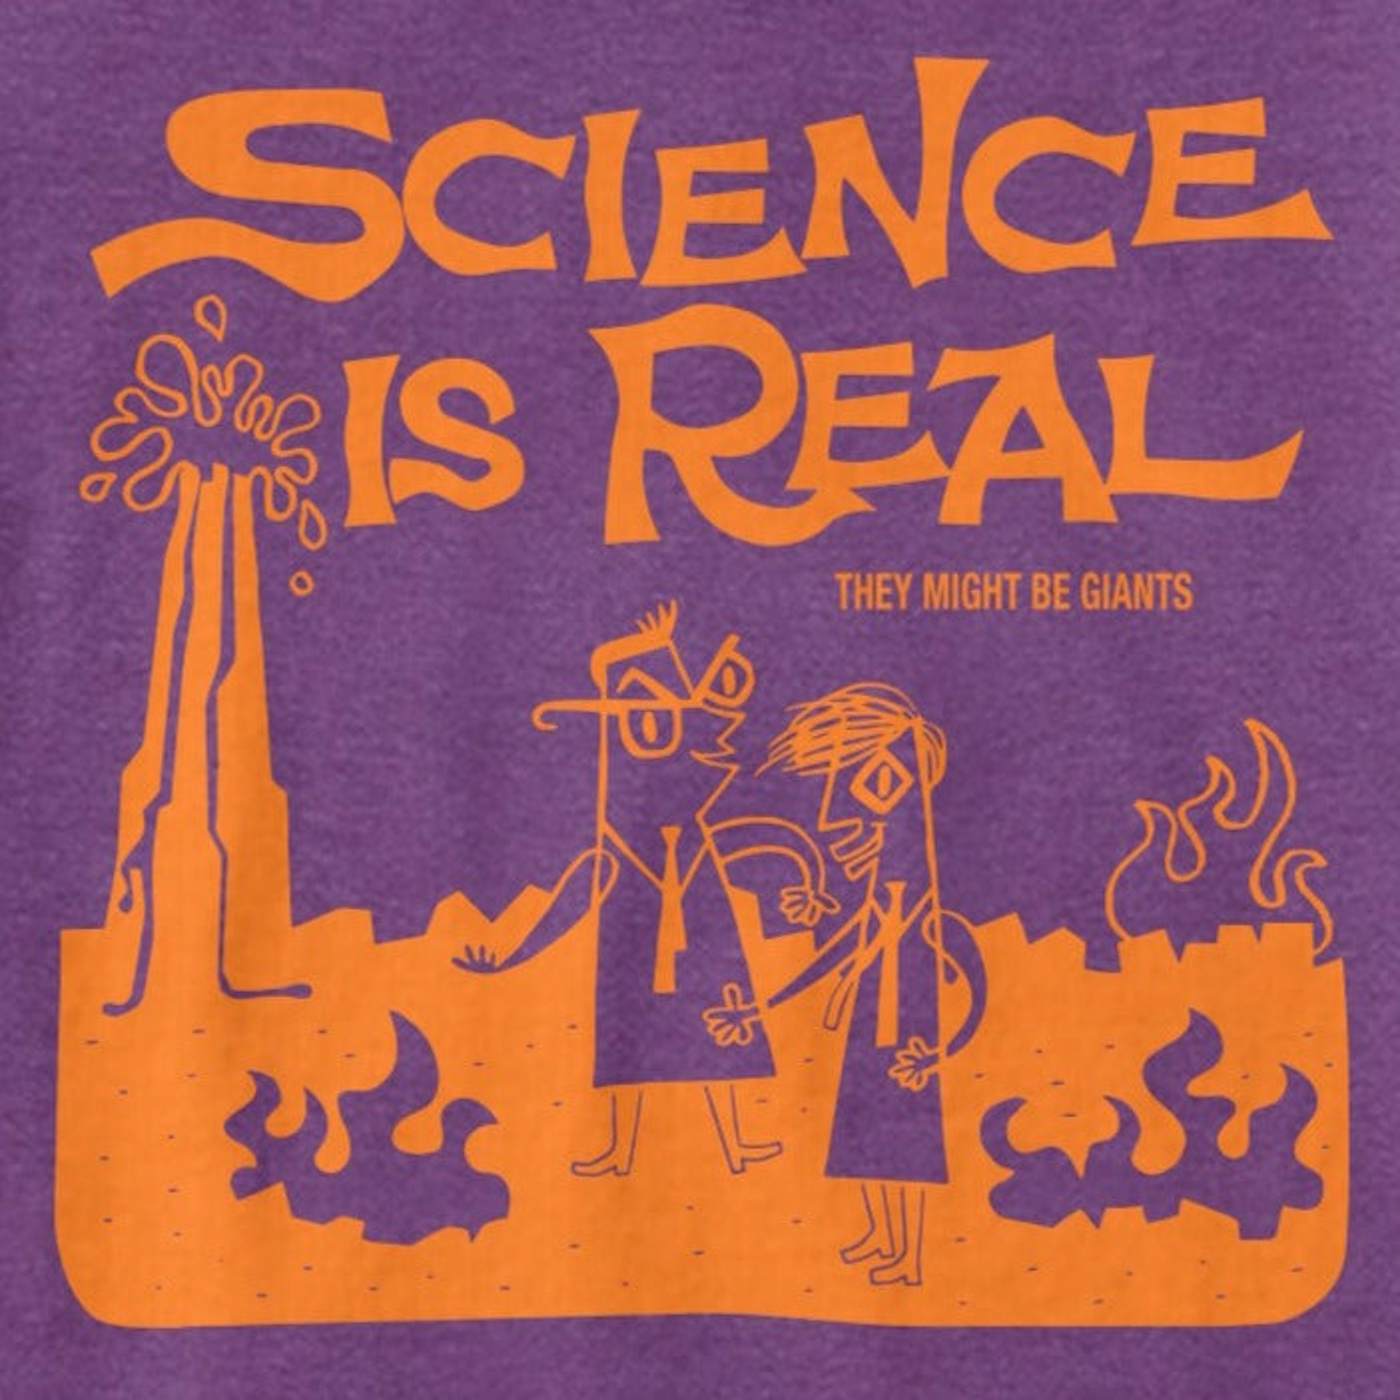 They Might Be Giants Science is Real Purple T-Shirt (Unisex)